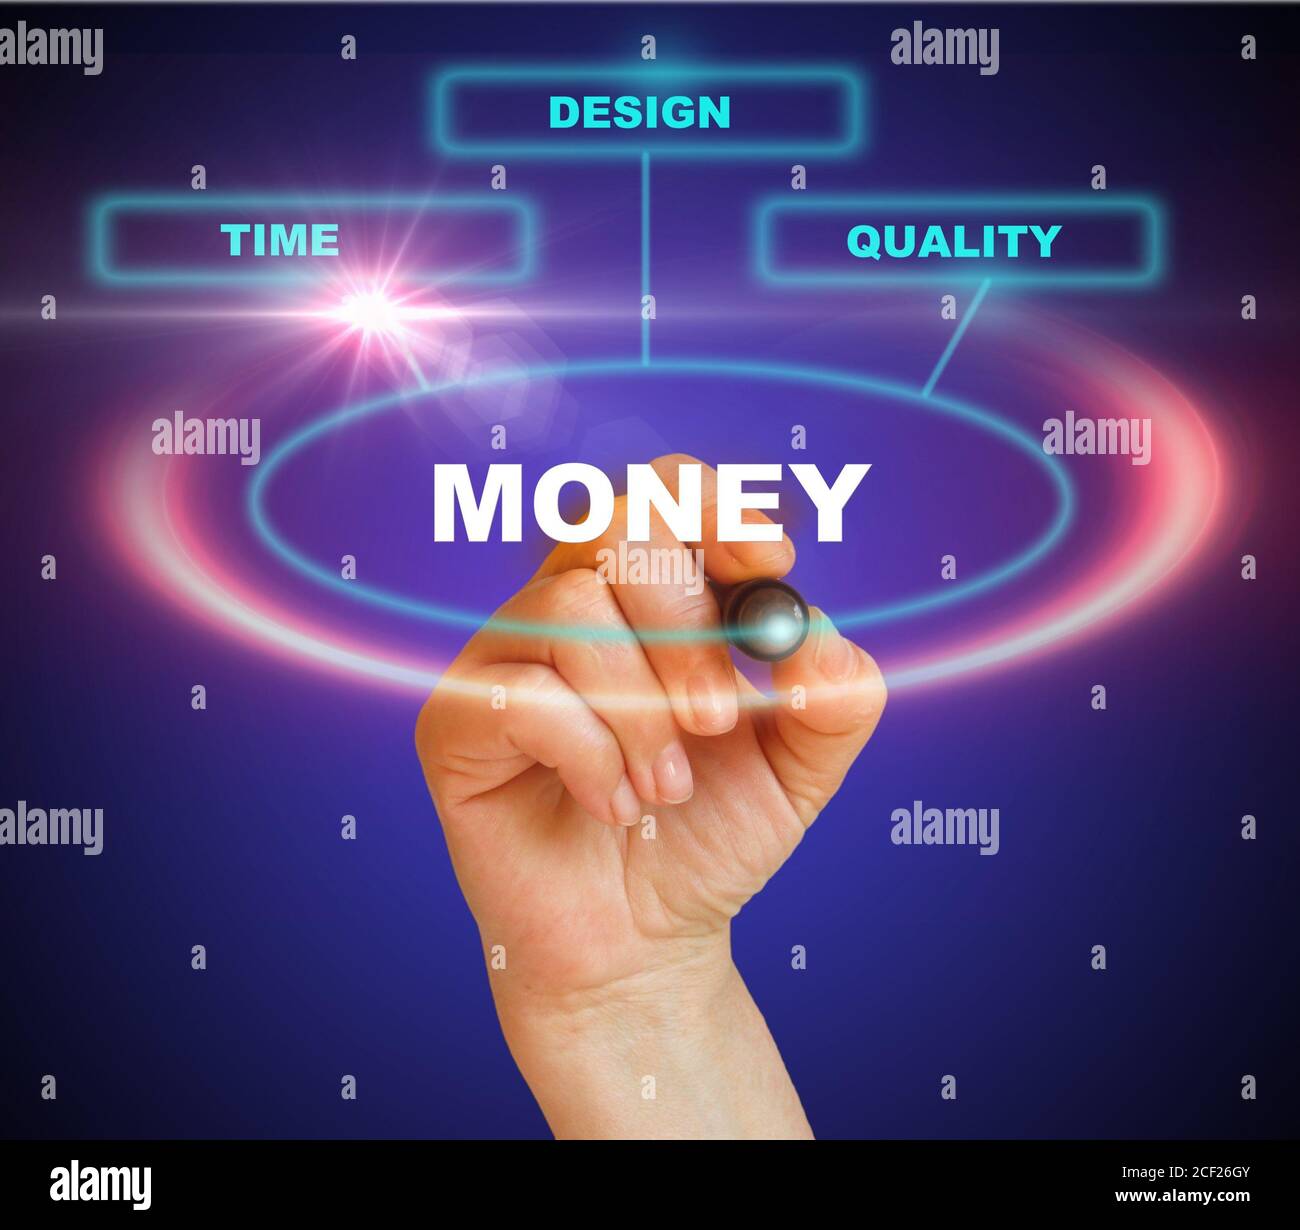 presenting a business concept for making money made in 2d software. Stock Photo